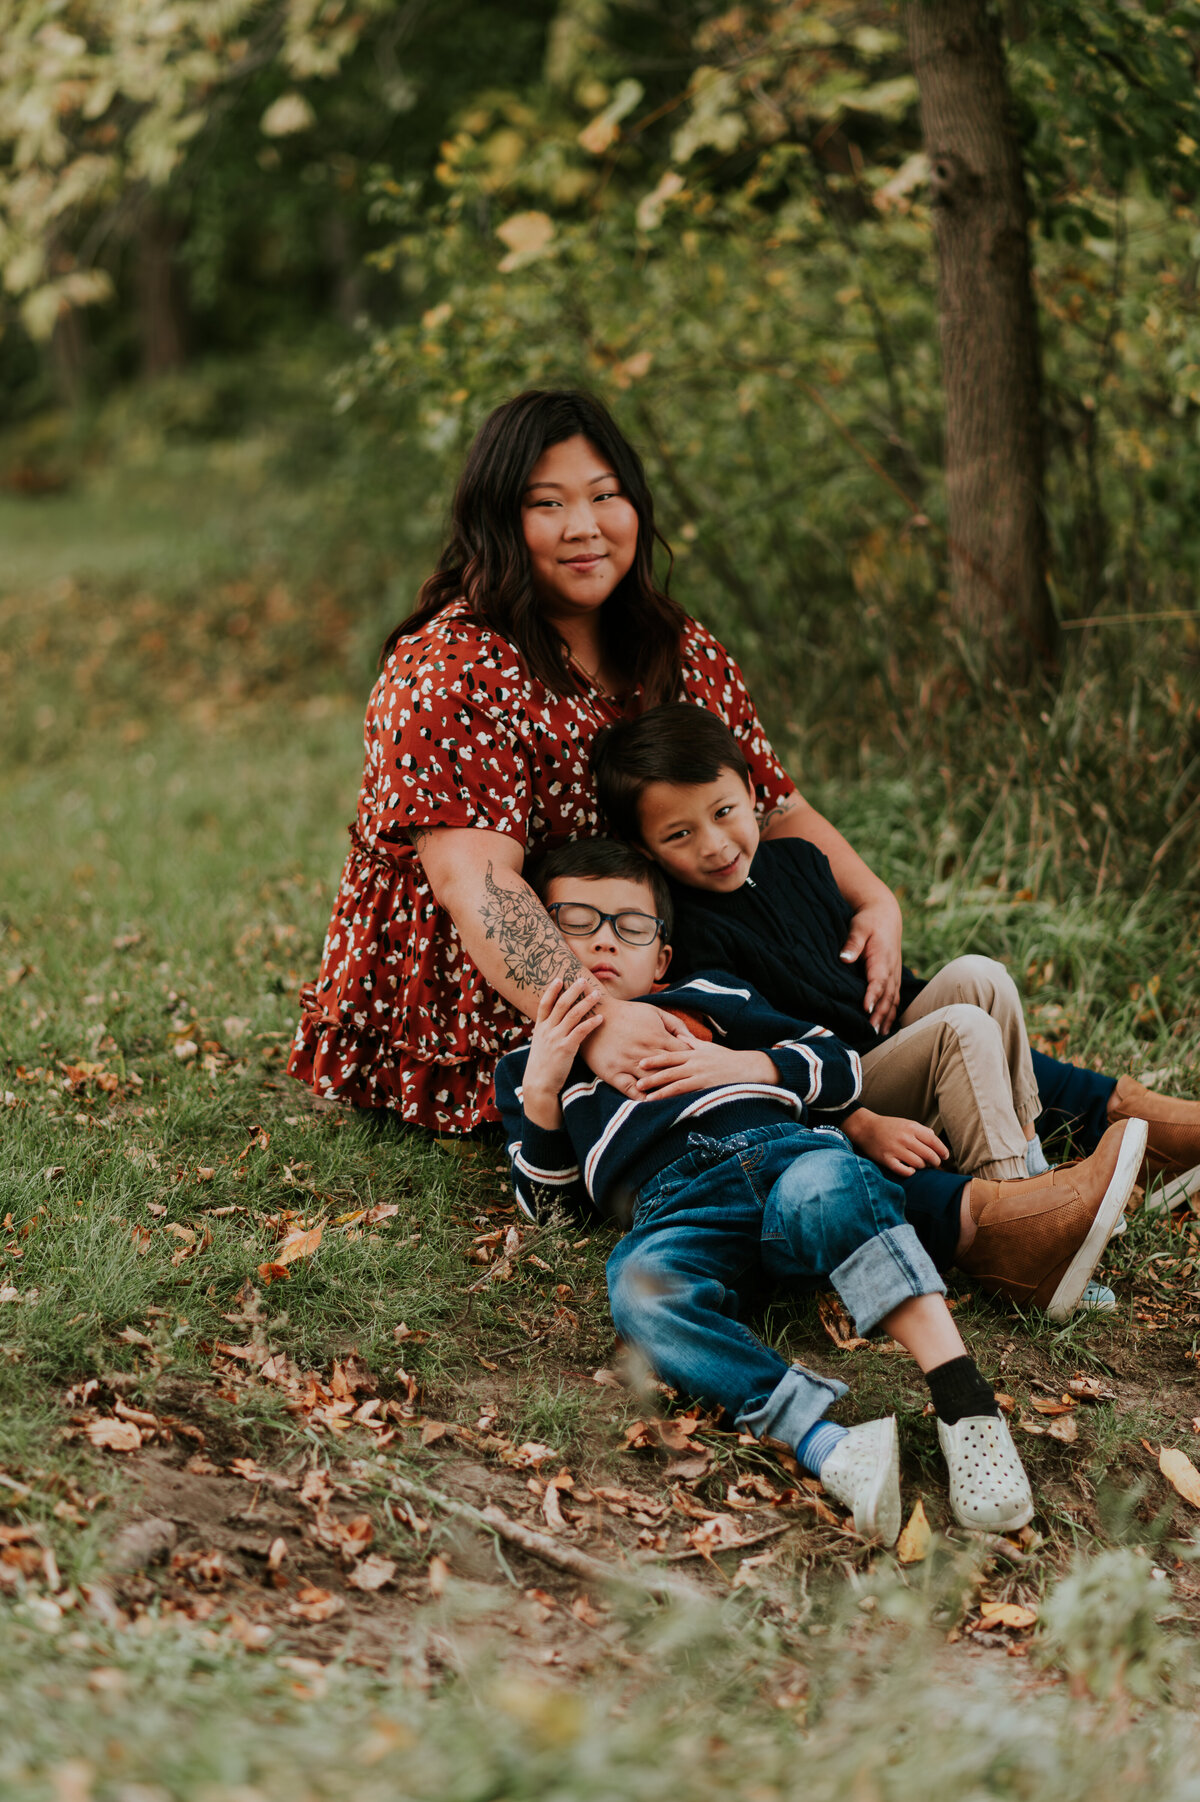 Gather amidst greenery in Minneapolis family photography. Shannon Kathleen Photography creates timeless portraits that reflect your family's harmony. Book now!